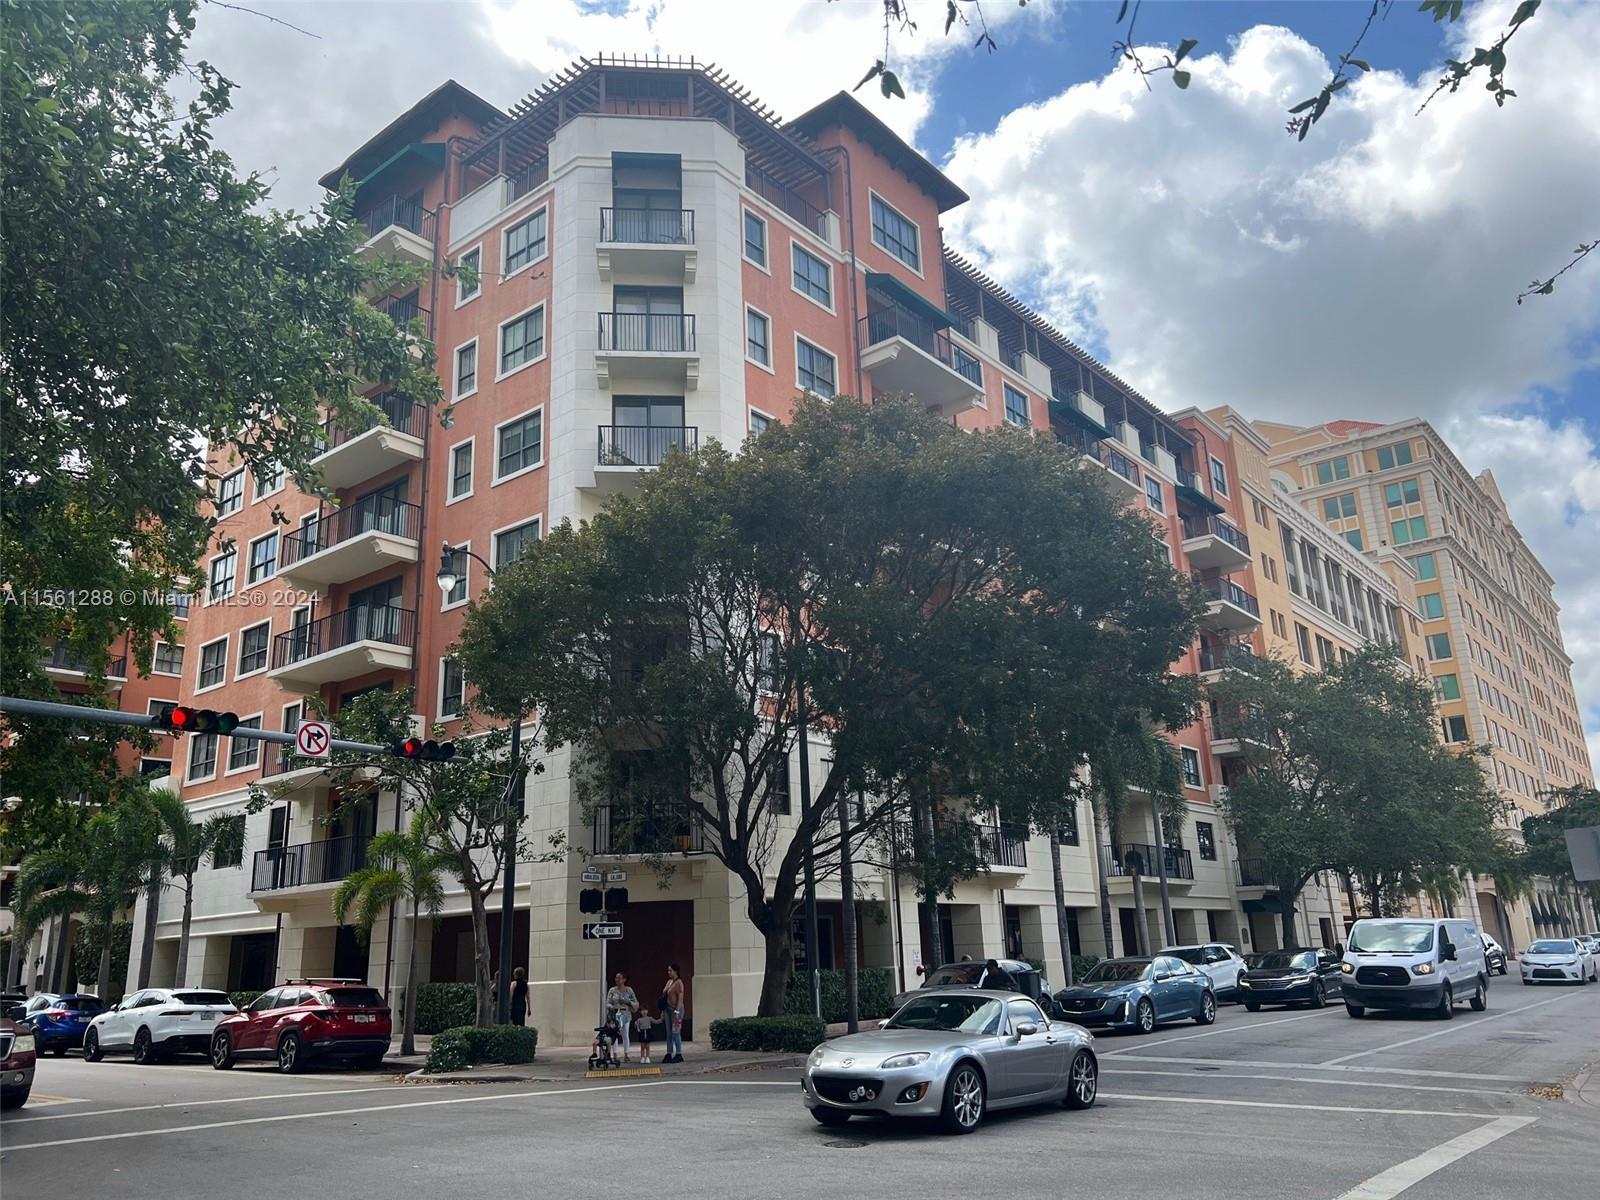 Photo of 100 Andalusia Ave #401 in Coral Gables, FL